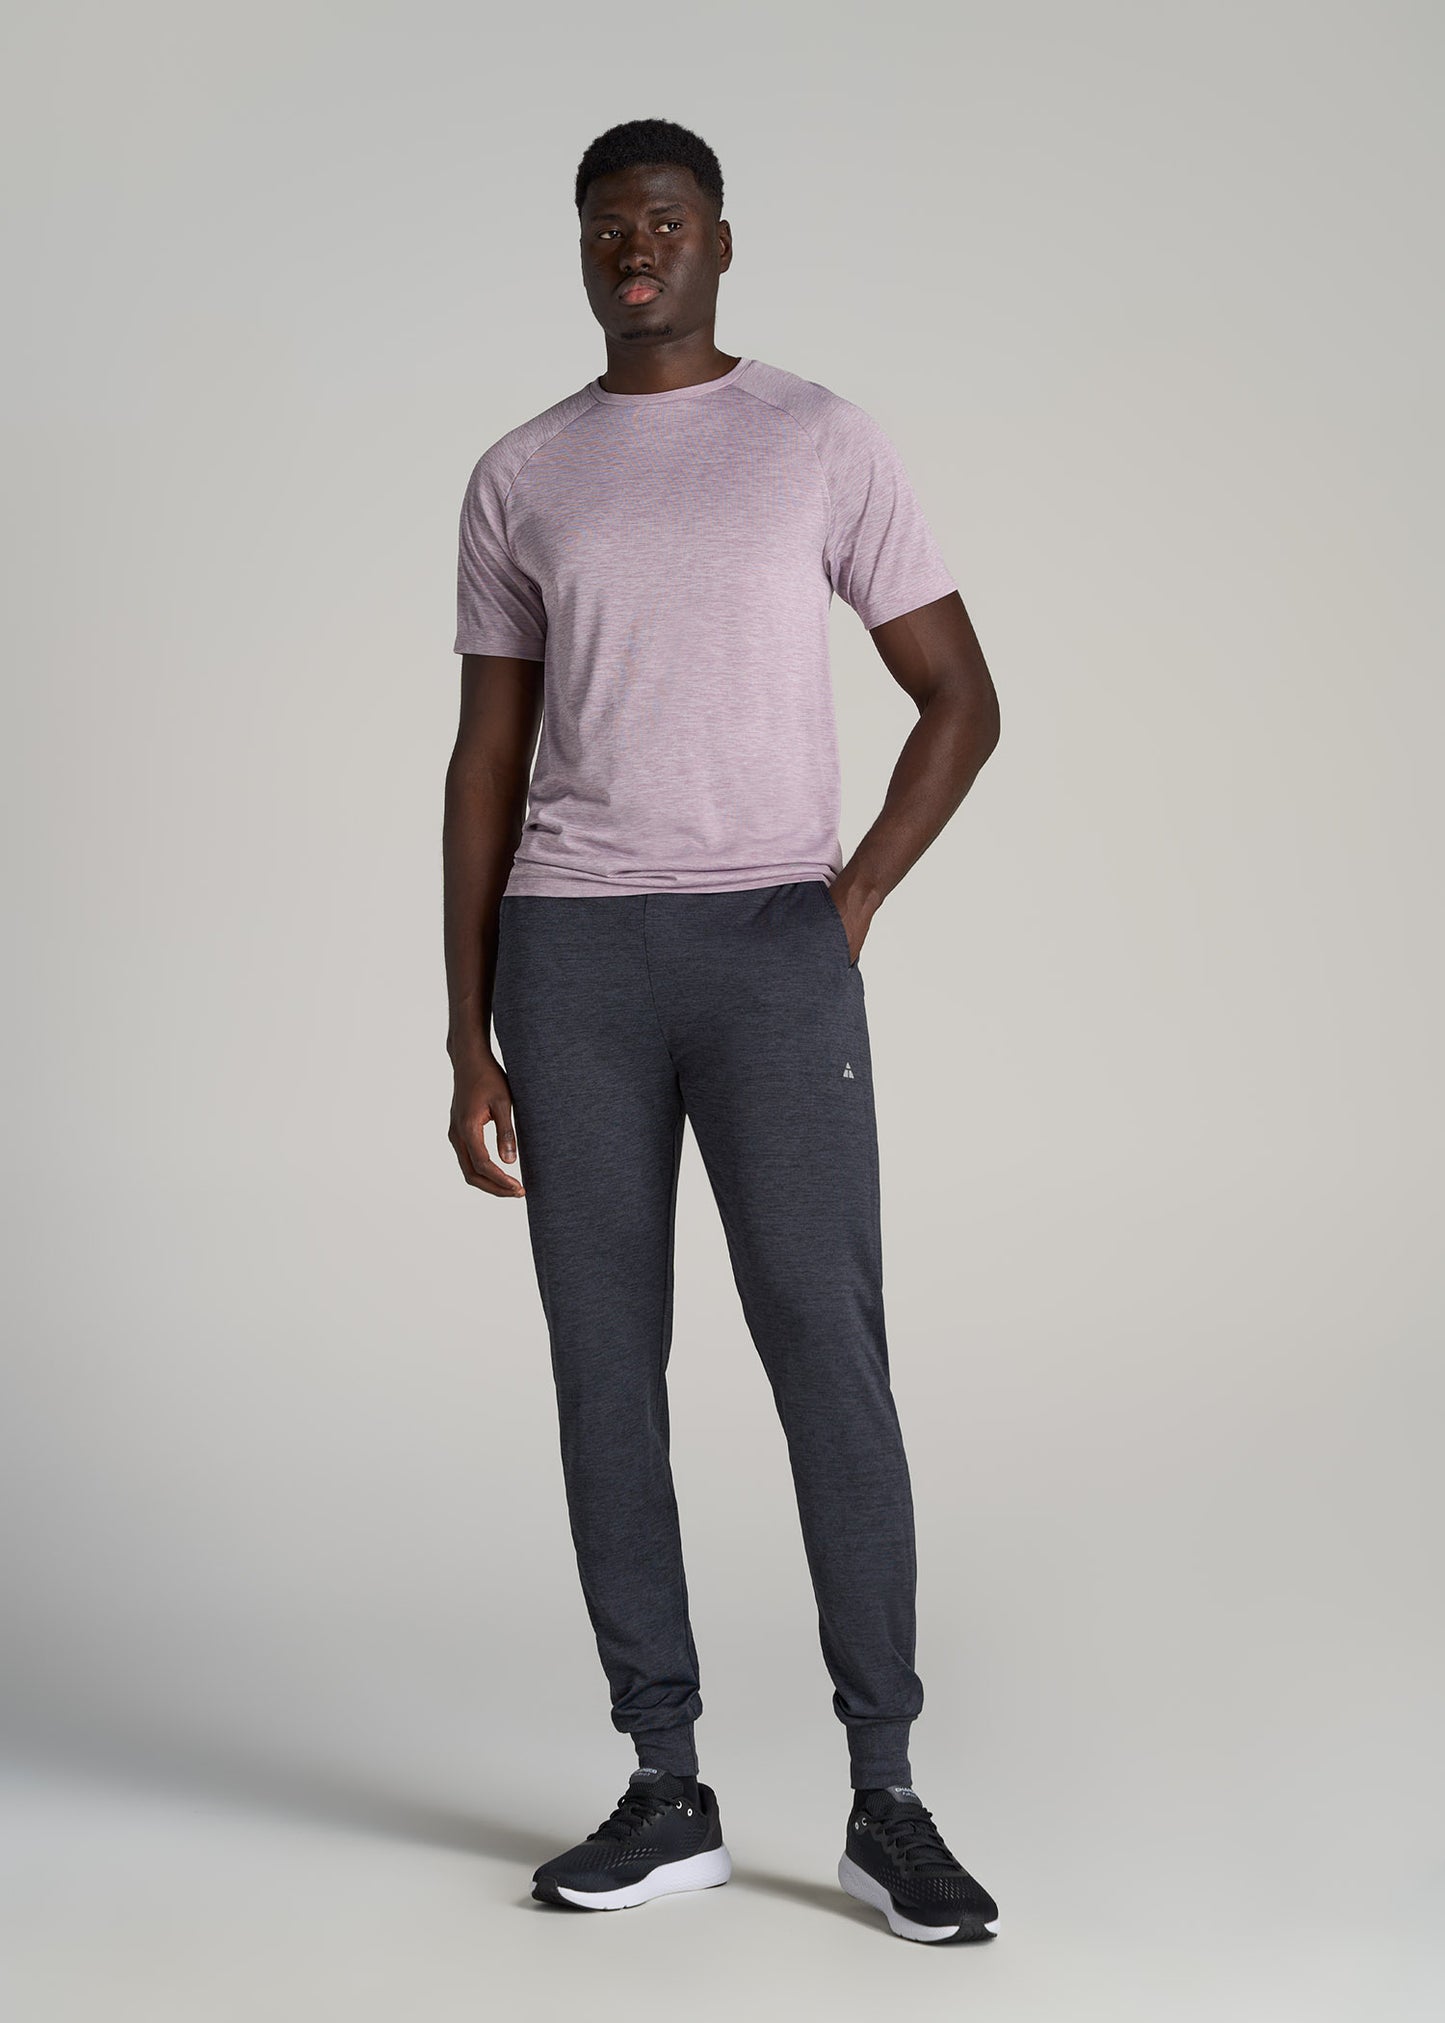    American-Tall-Men-AT-Performance-Engineered-Joggers-CharcoalMix-full